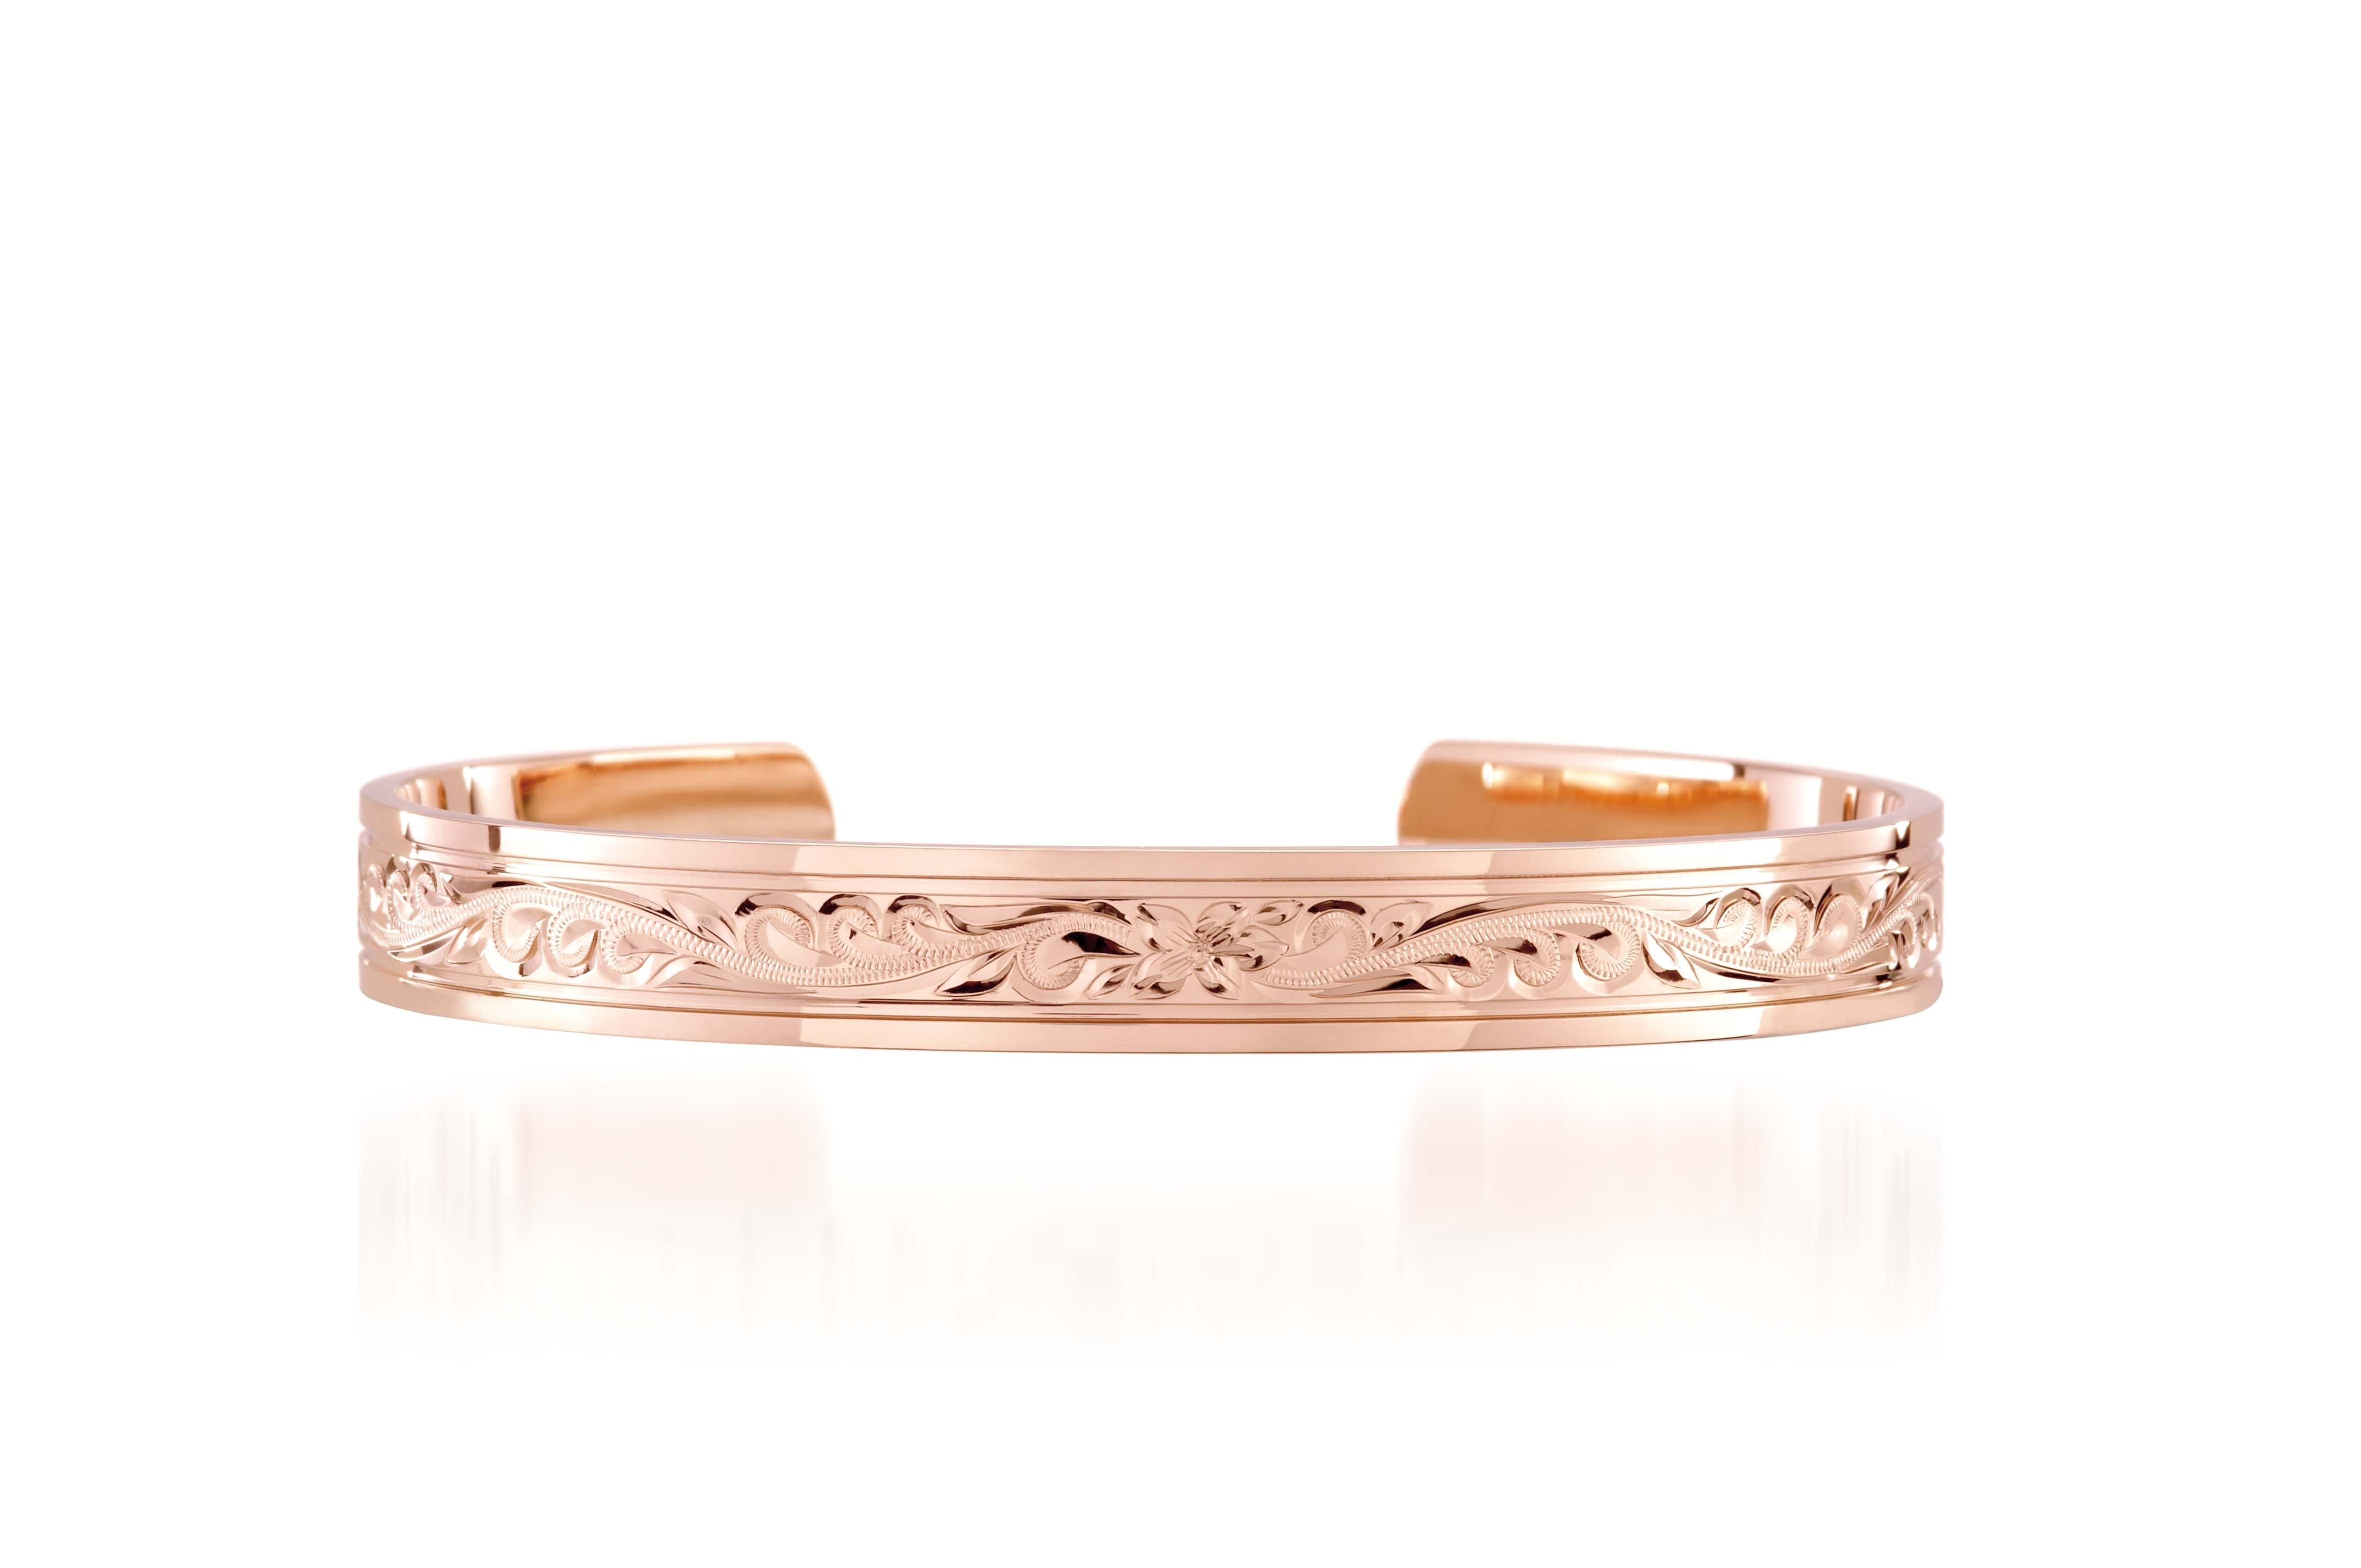 The picture shows a 14K rose gold royal bangle with plumeria engravings.